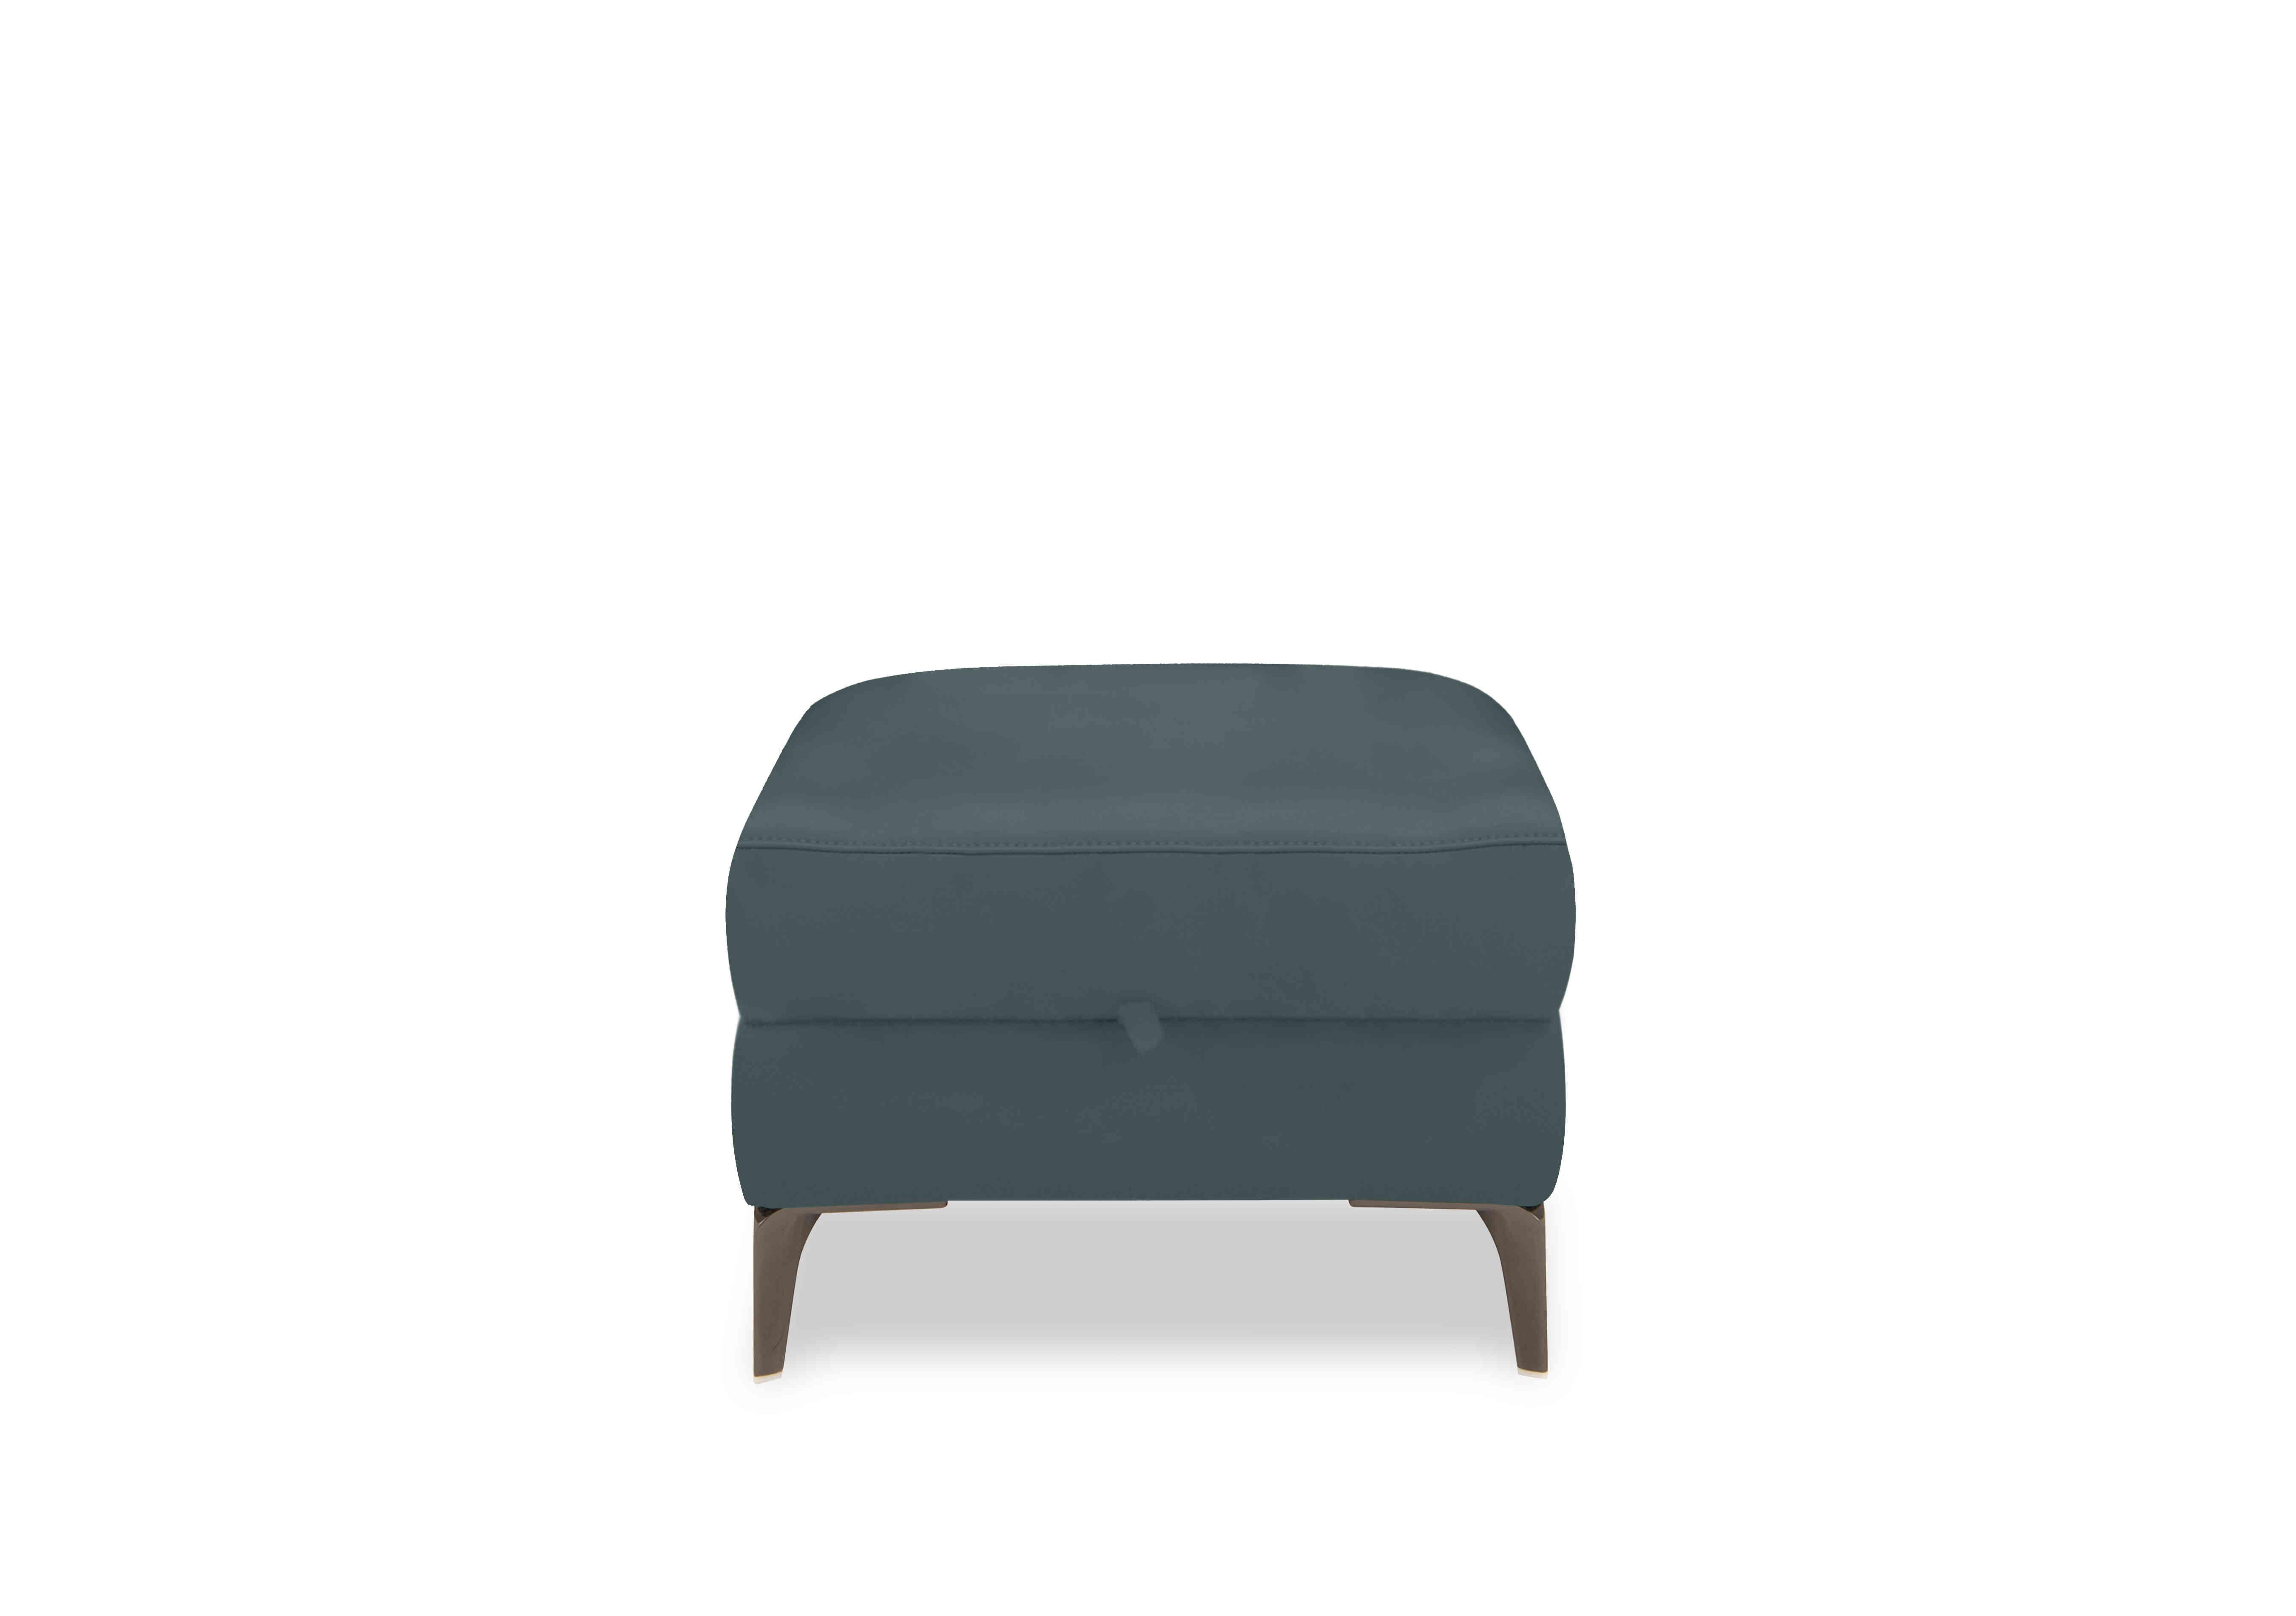 New York Leather Storage Footstool in Bv-301e Lake Green on Furniture Village